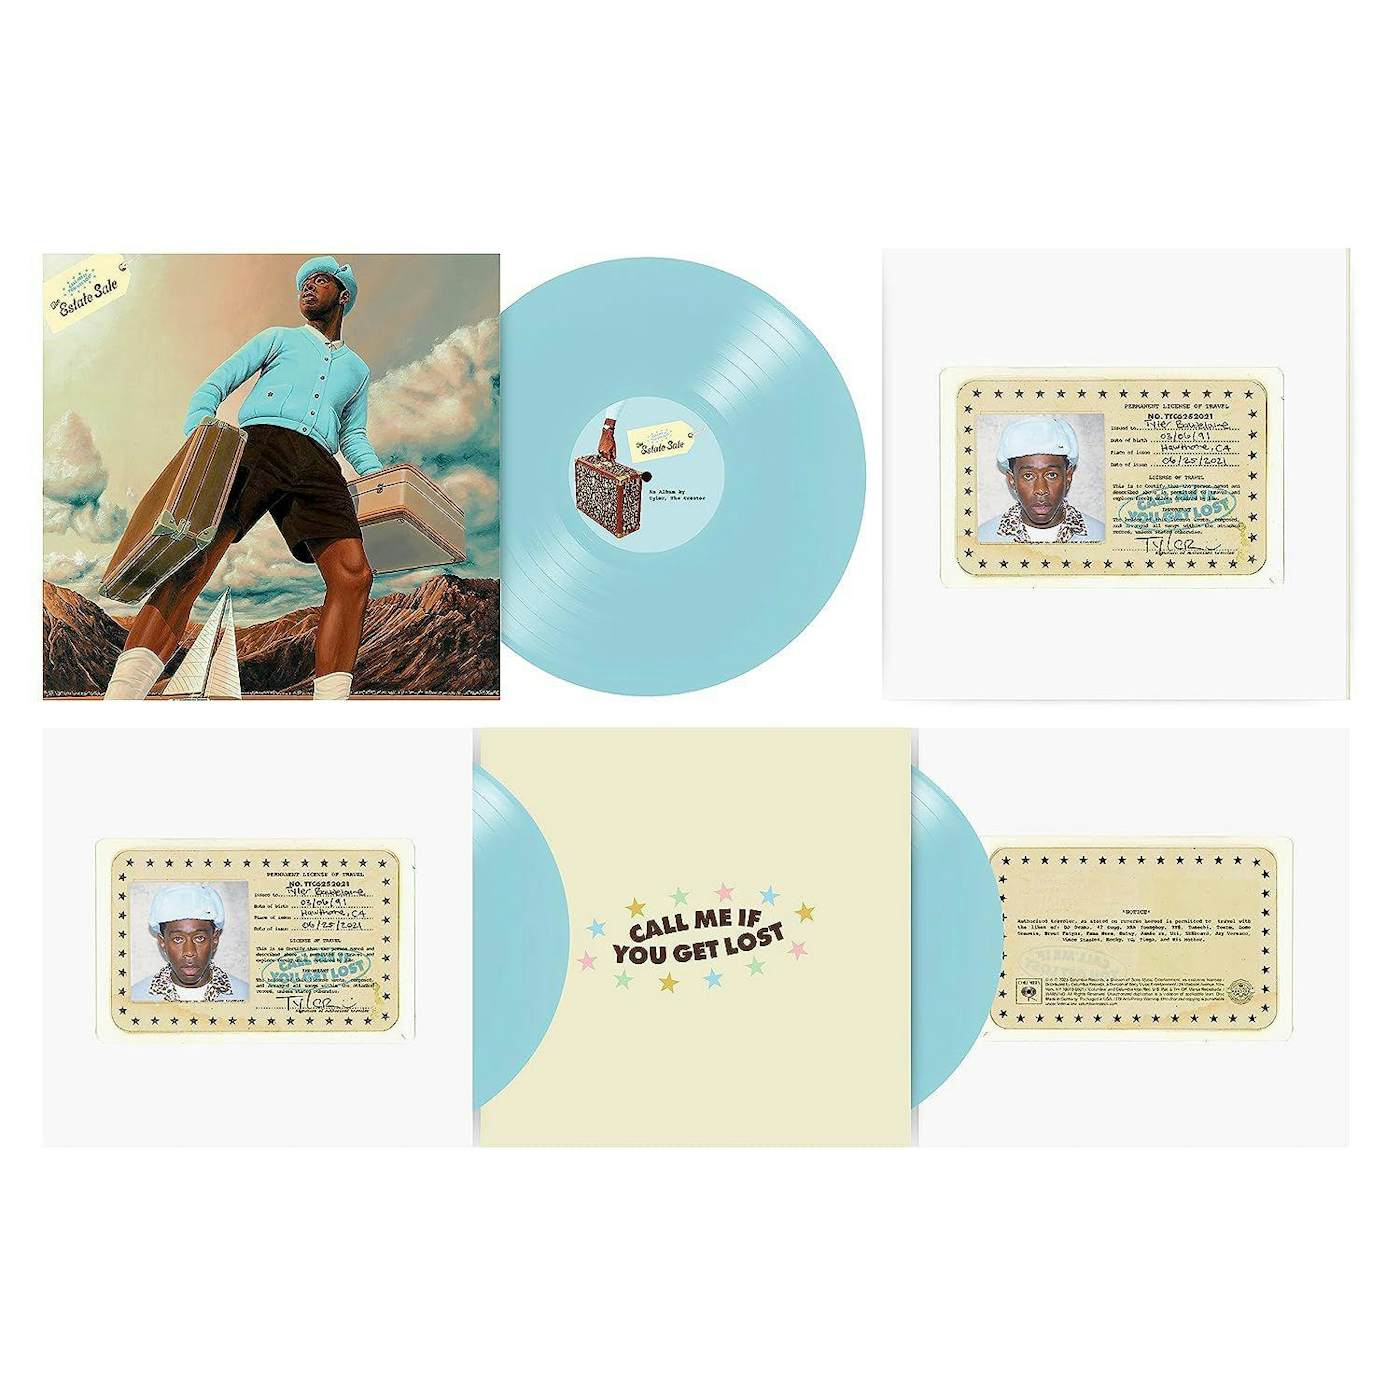 Call Me If You Get Lost: The Estate Sale (3LP/Limited Edition) Vinyl